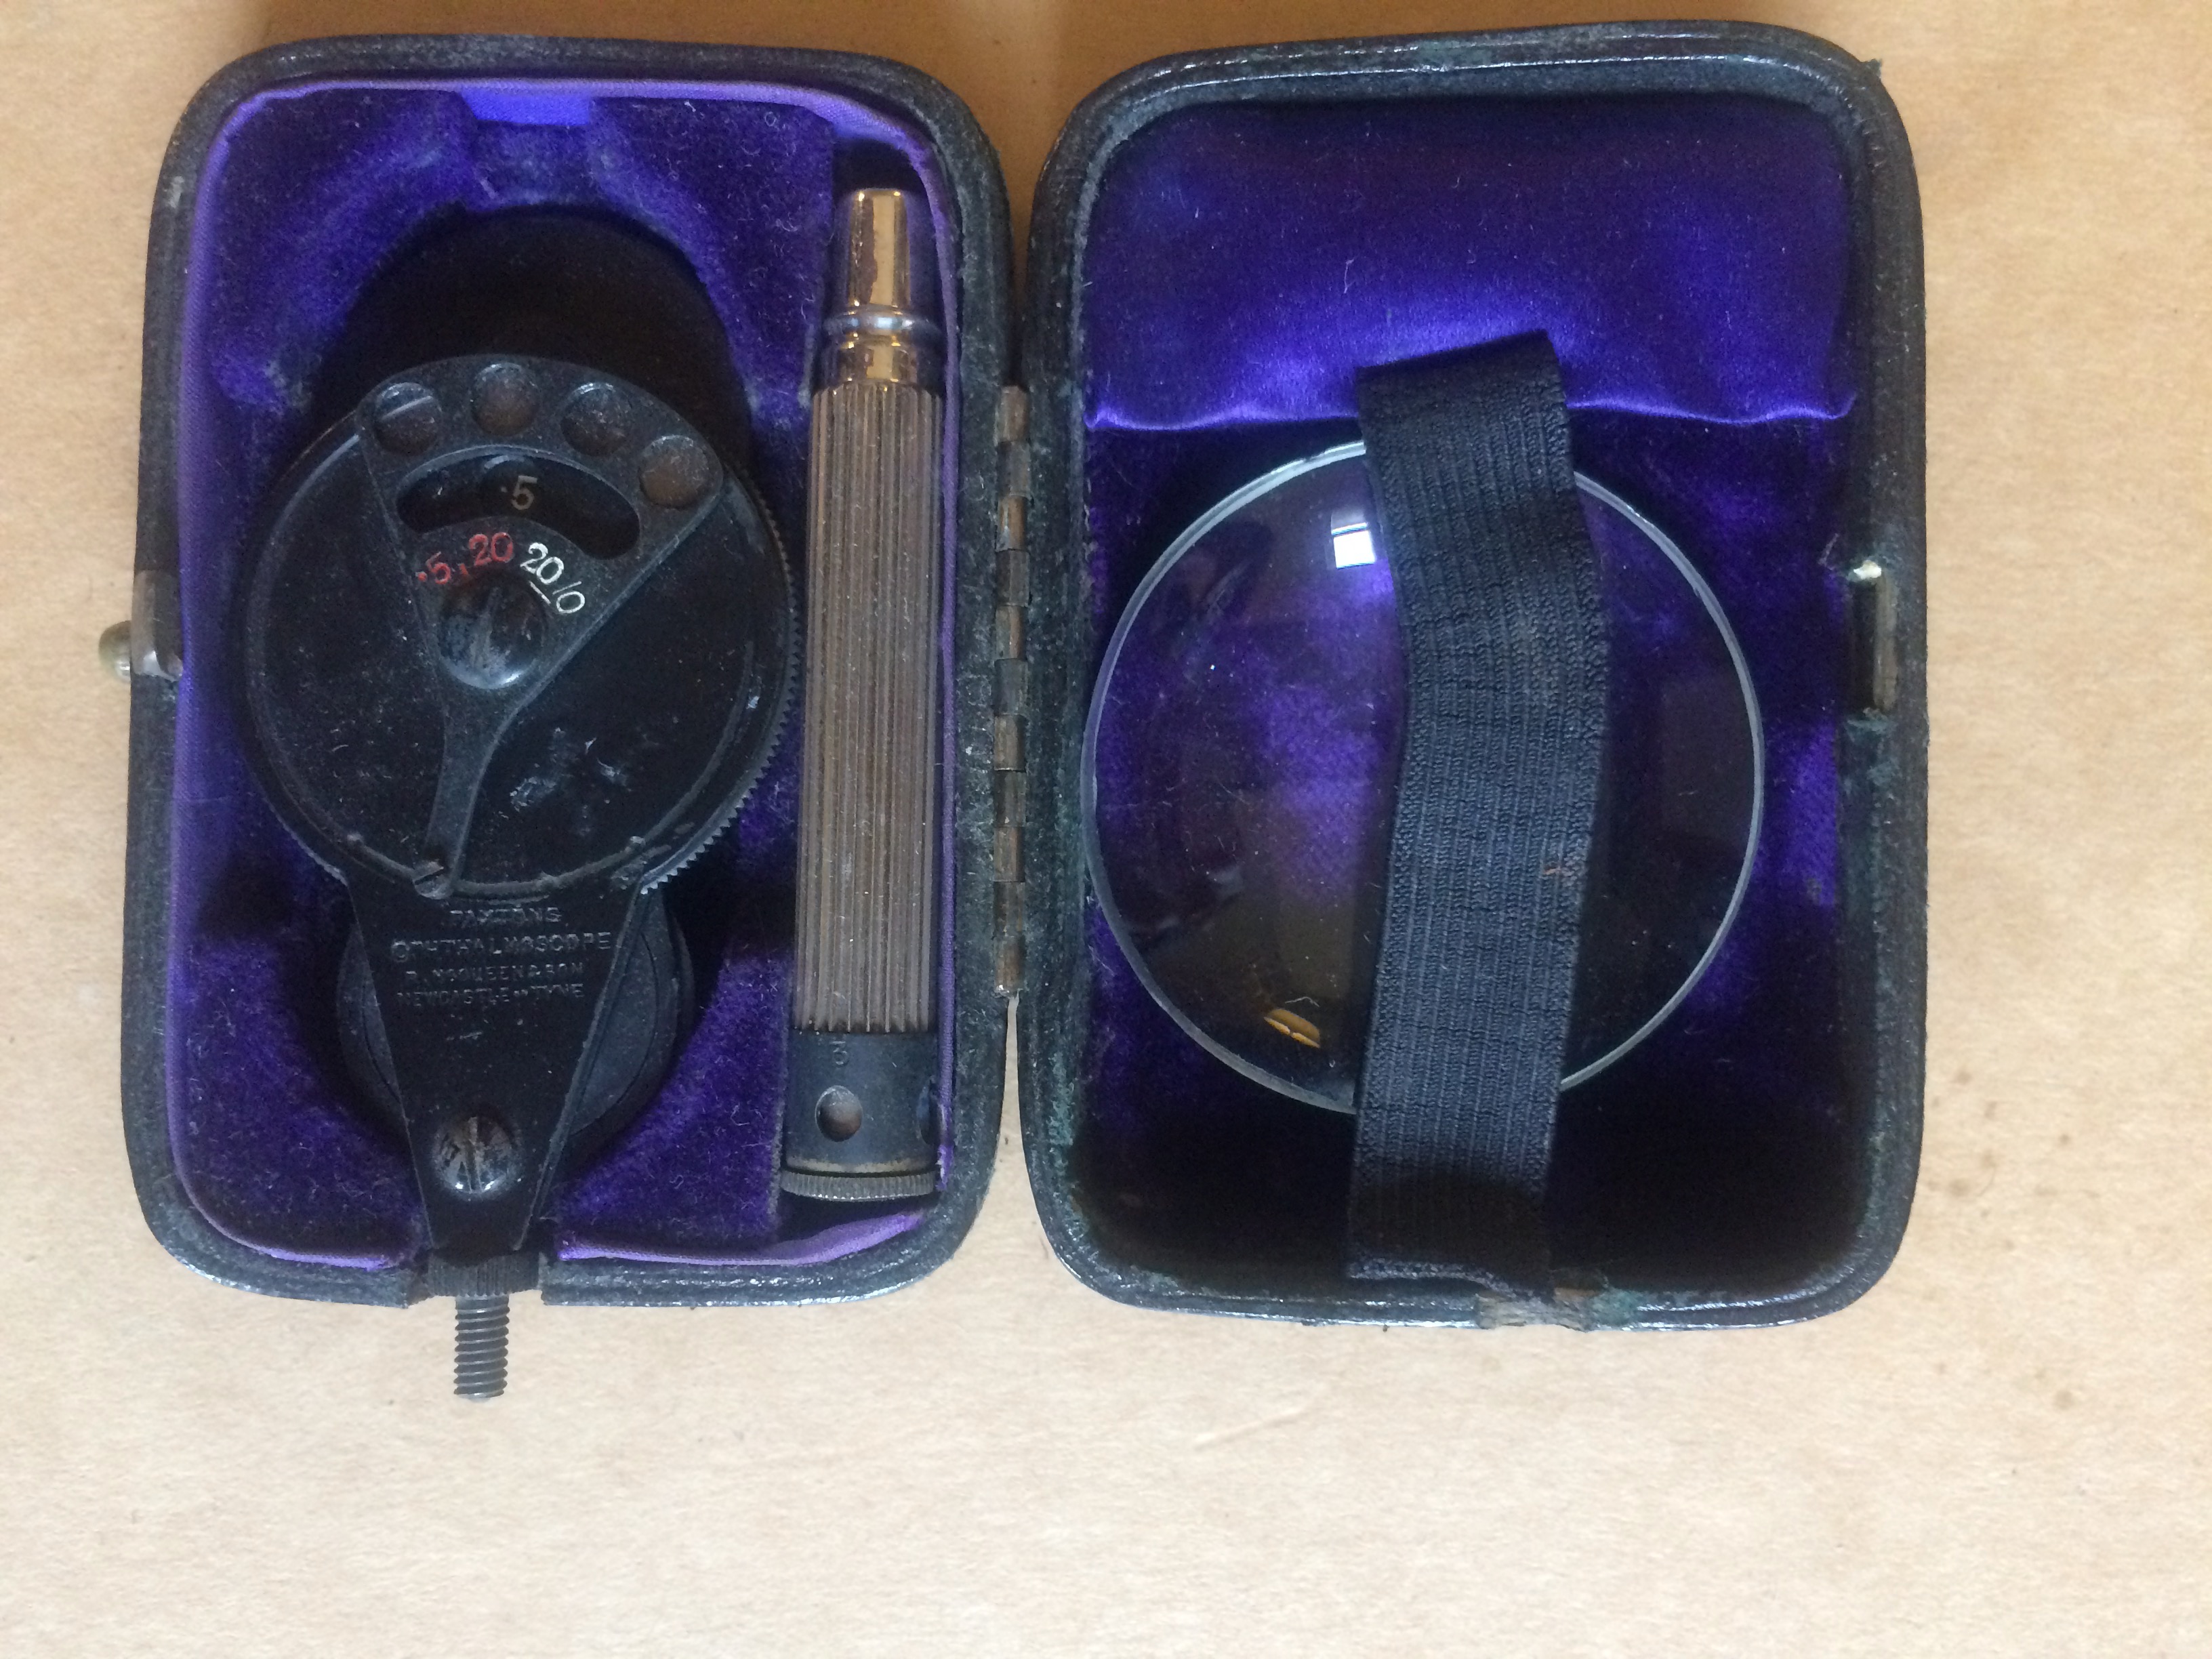 Paxtons Ophthalmoscope